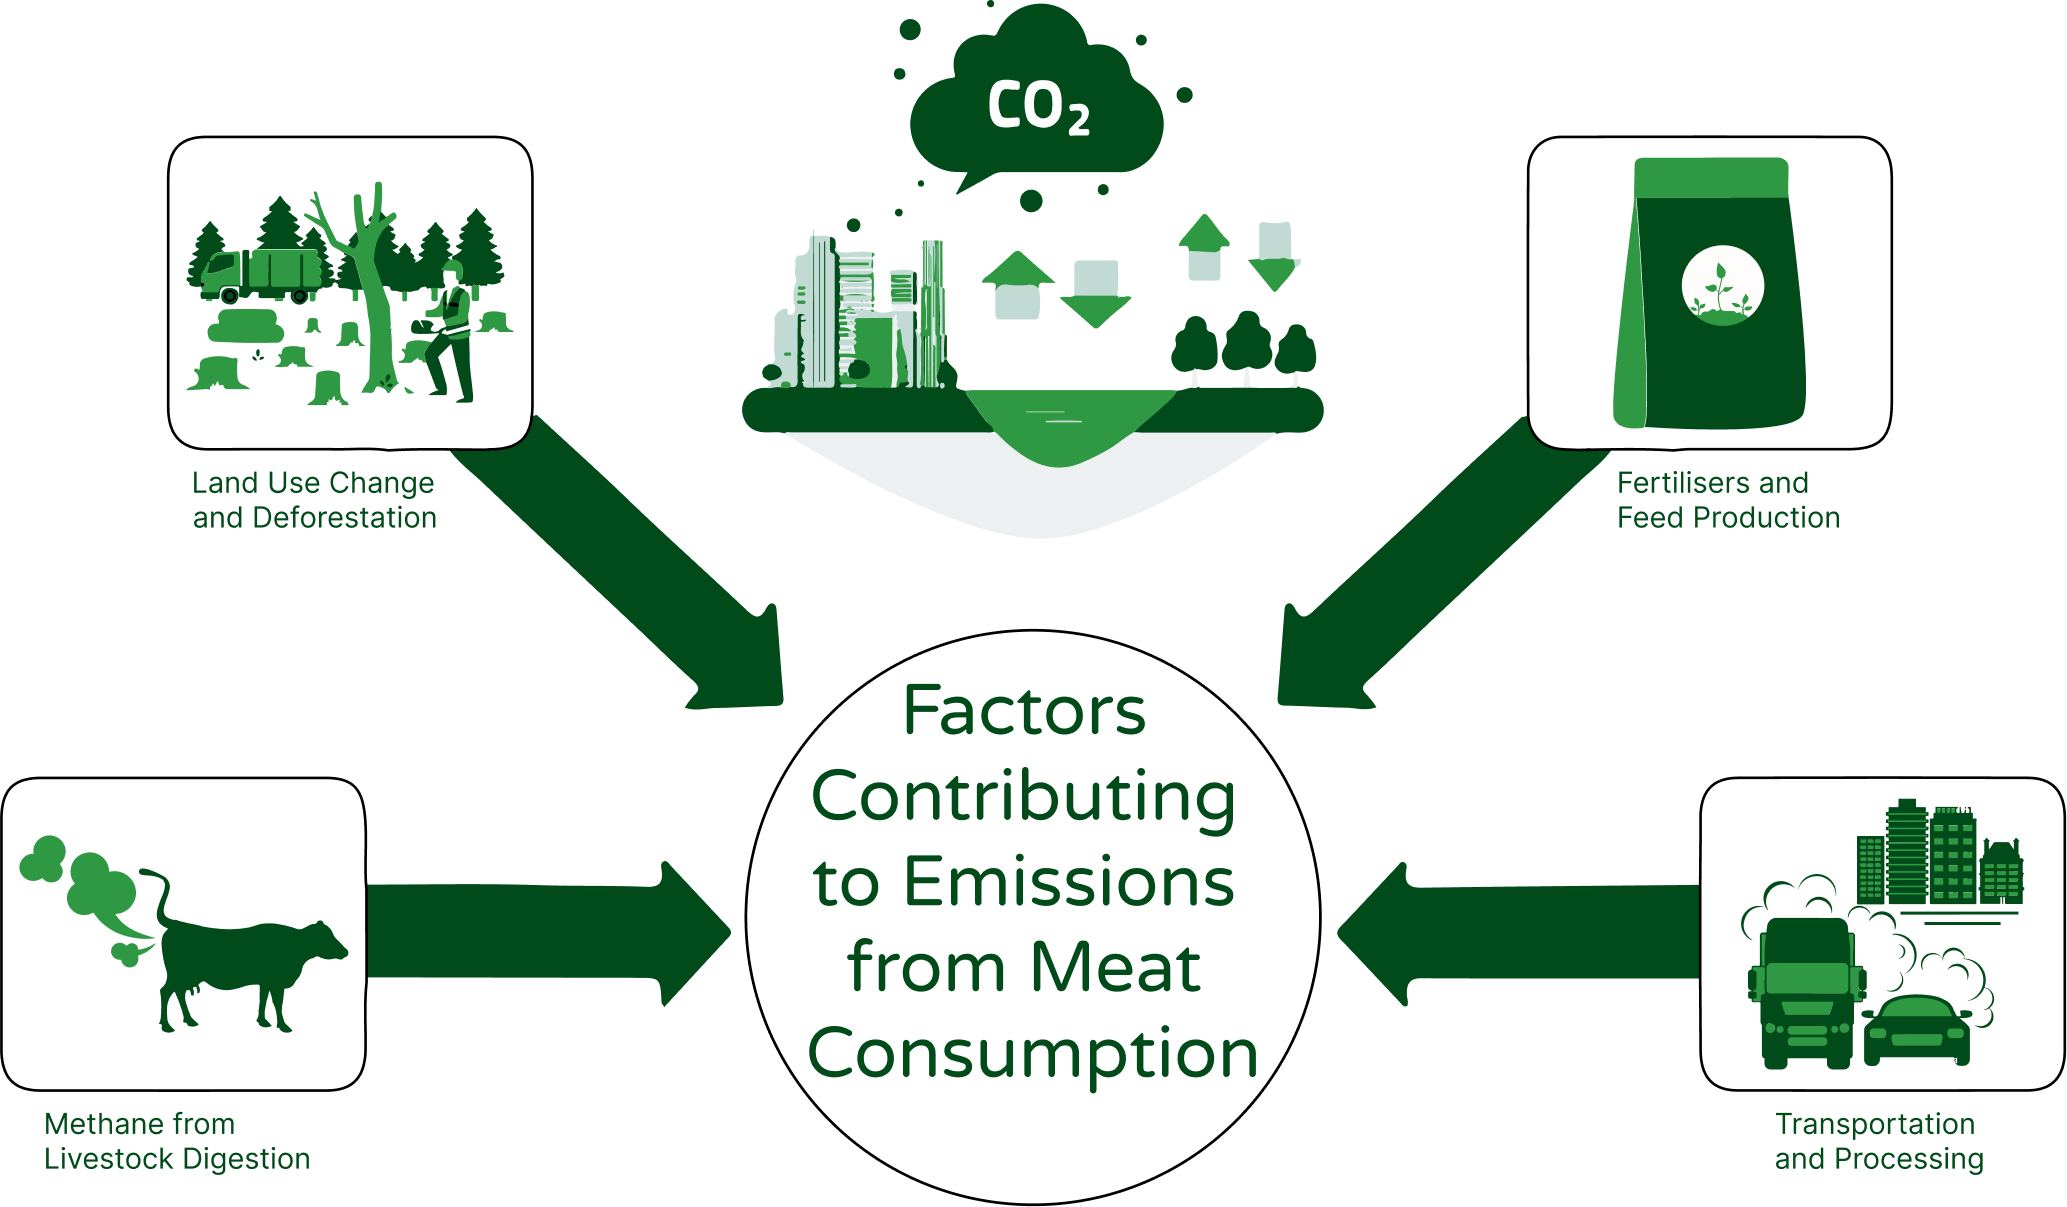 An image depicting four factors contributing to emissions from meat consumption. The visual shows four icons, each representing a different factor. The first icon shows a cow with methane gas emissions coming from its mouth, representing the methane produced from livestock digestion. The second icon shows a forest being cleared, representing land-use change and deforestation associated with livestock farming. The third icon shows a bag of fertilizers and a corn plant, representing the use of fertilizers and feed production for livestock. The fourth icon shows a truck and a factory, representing the emissions associated with transportation and processing of meat products.